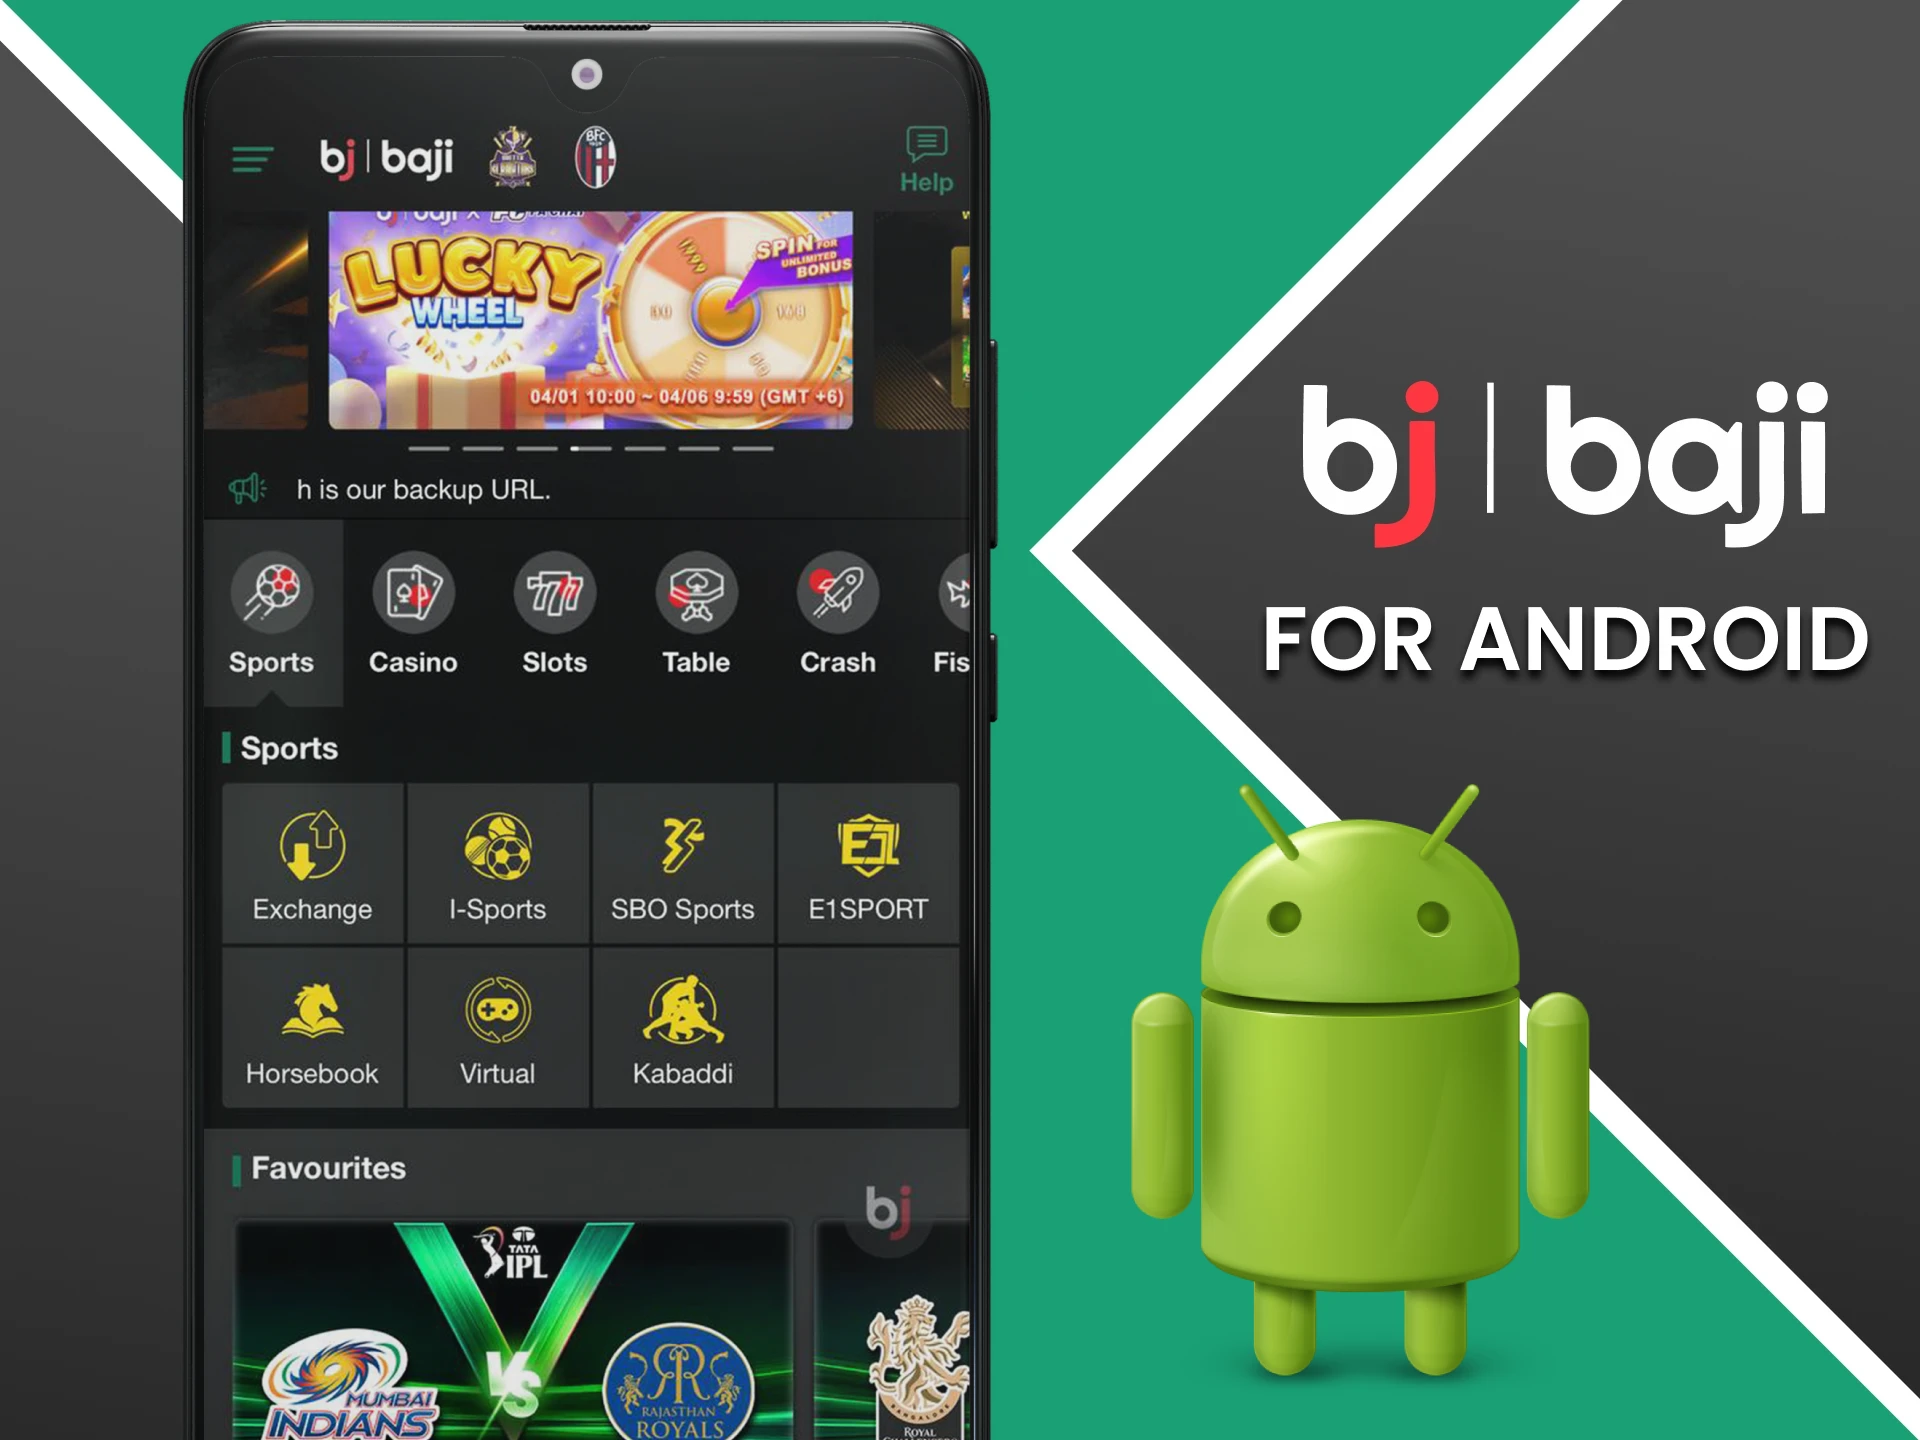 System requirements and supported Android devices to install the Baji betting app.